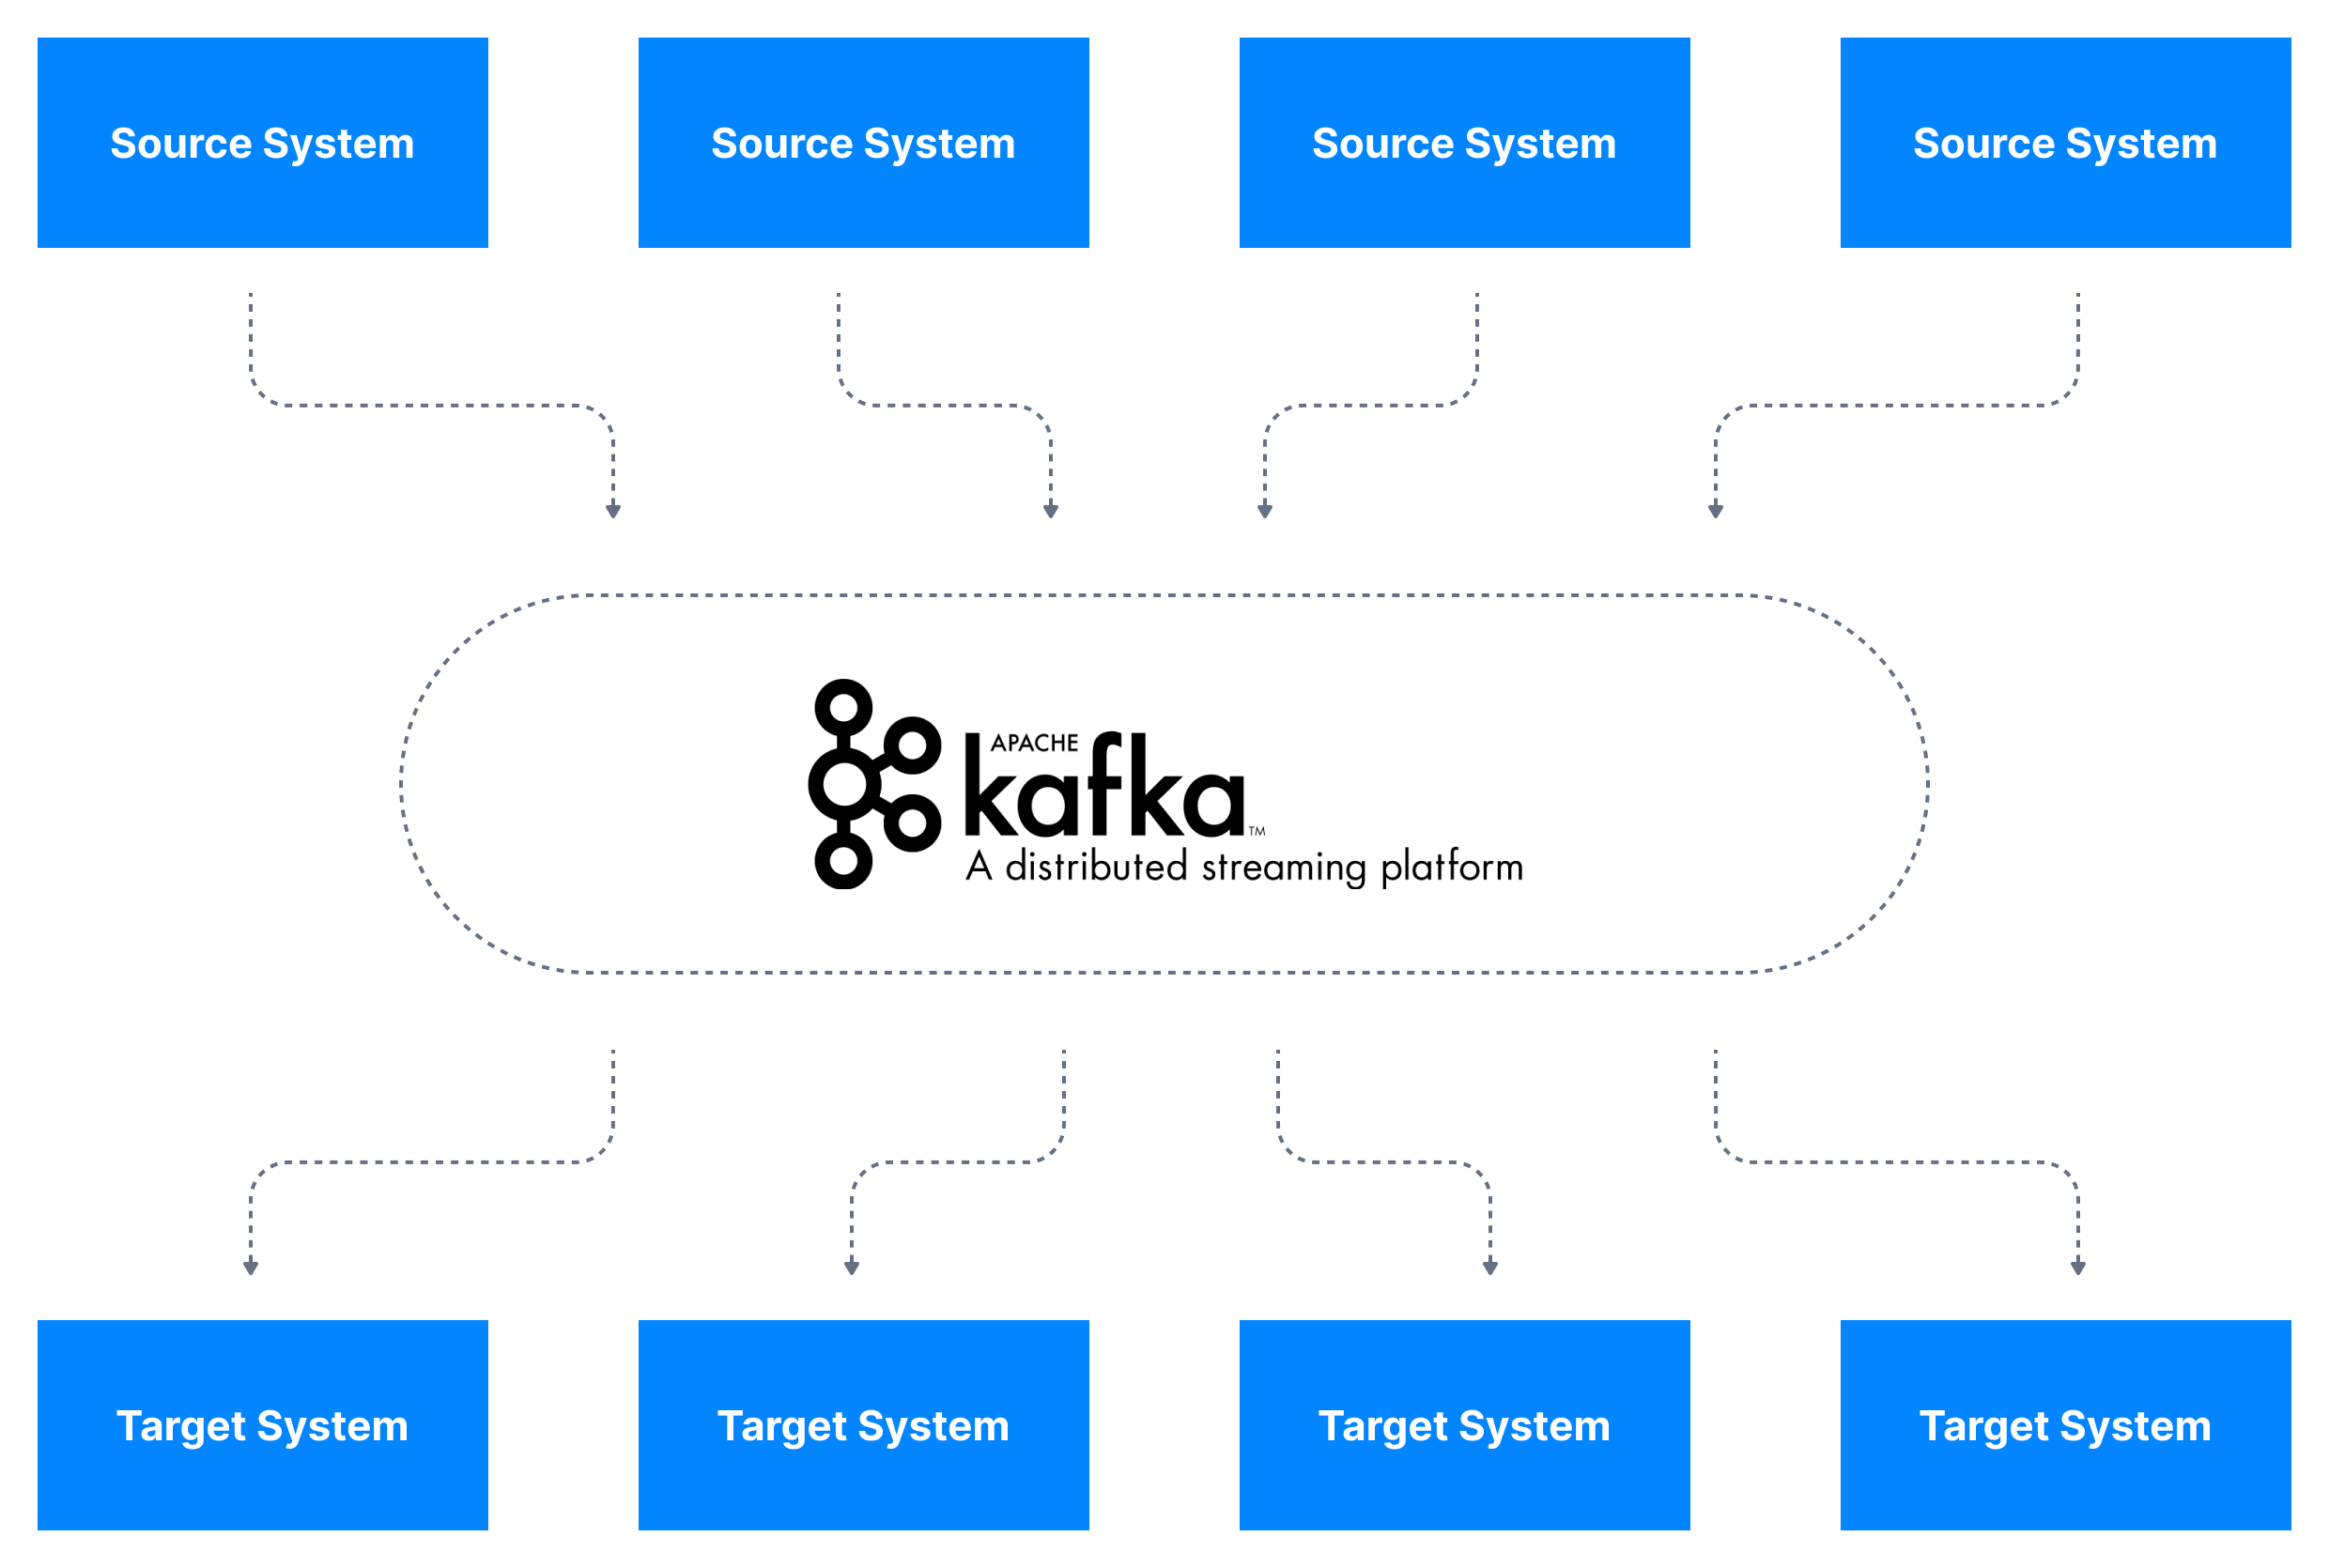 Apache Kafka provides an effective way for organisations to overcome data integration challenges by making it easy to decouple different systems